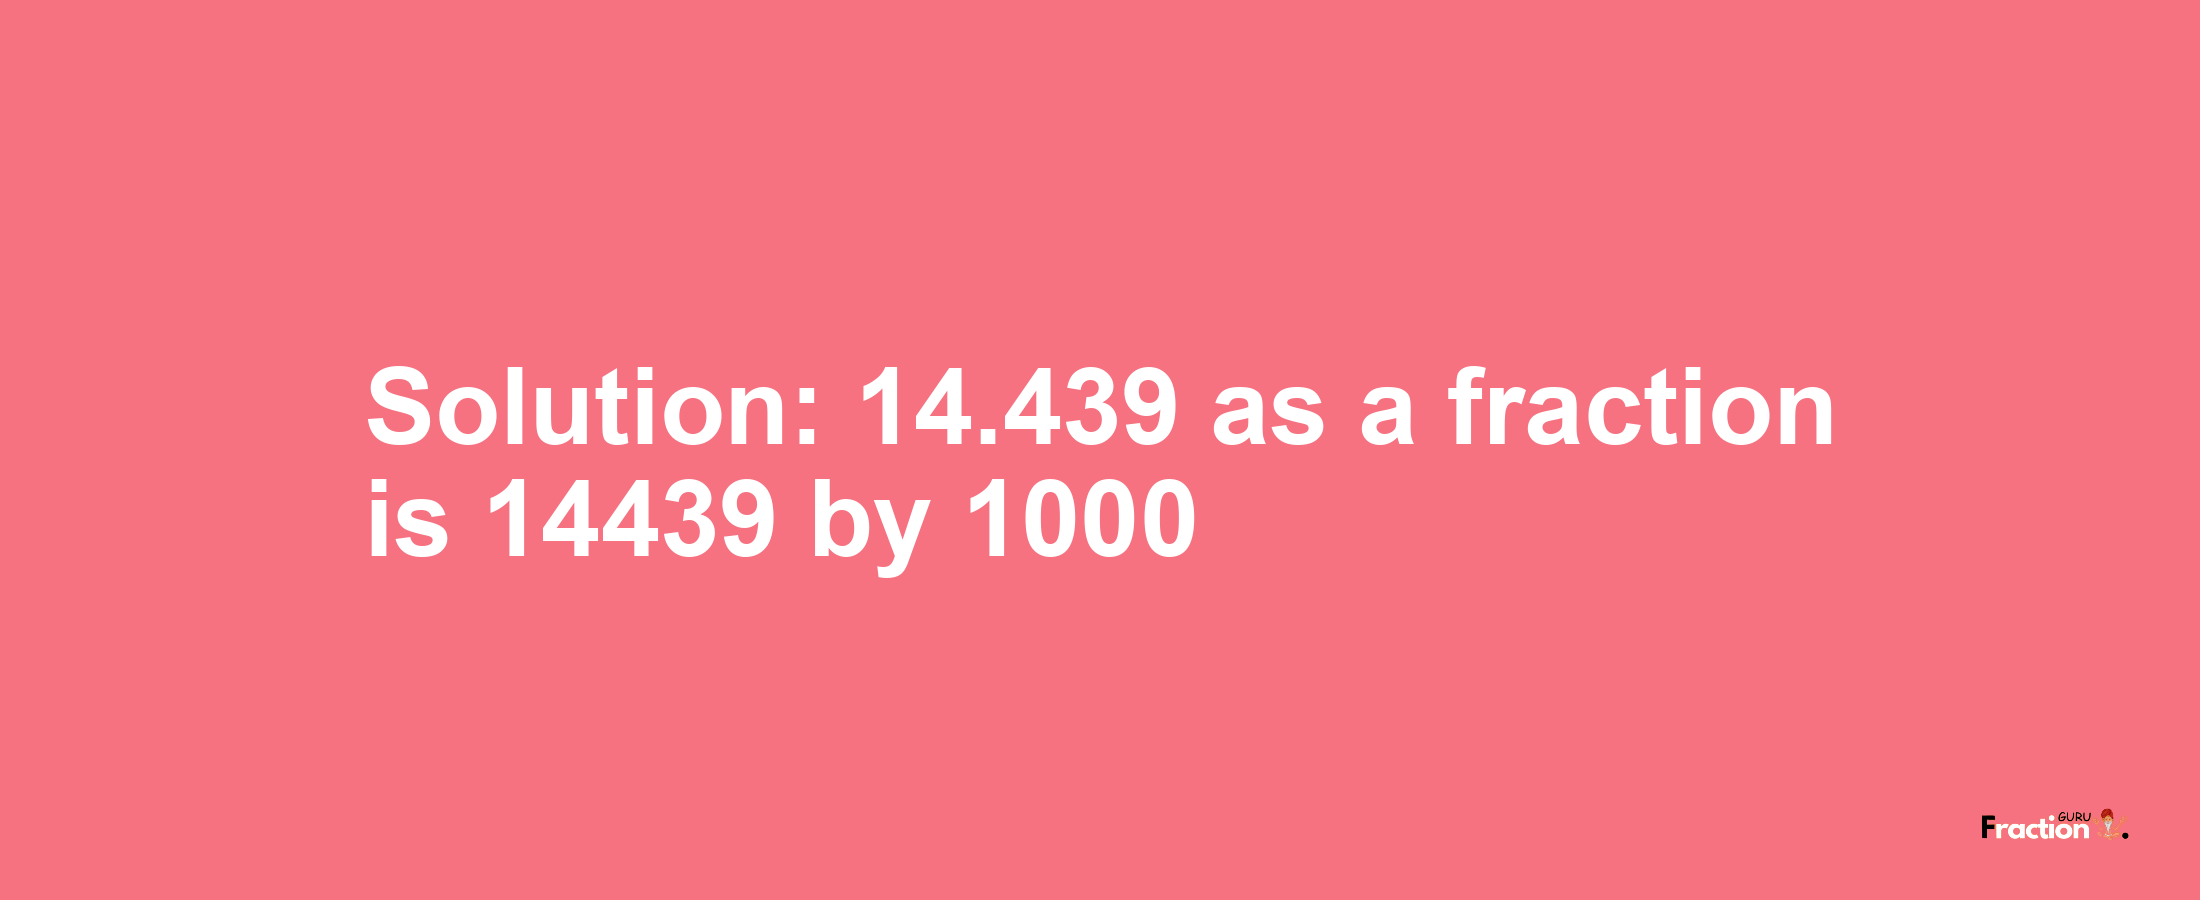 Solution:14.439 as a fraction is 14439/1000